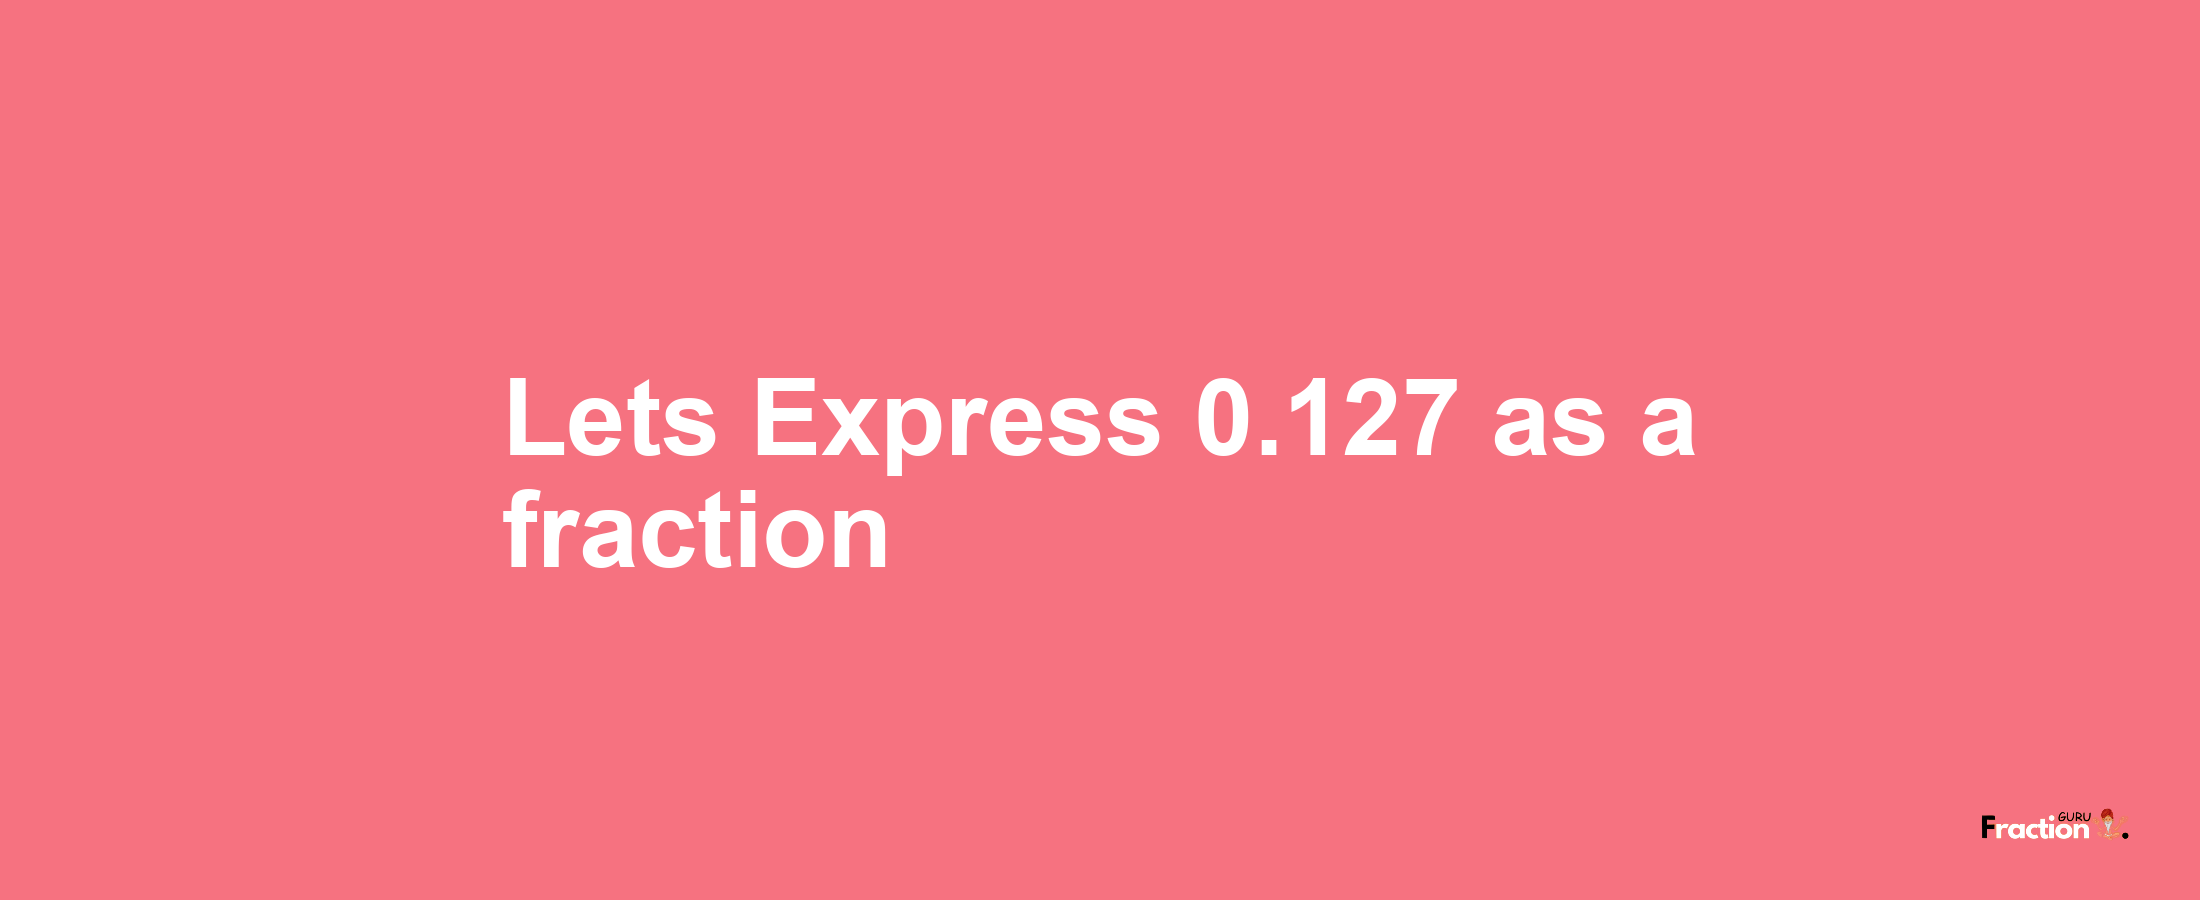 Lets Express 0.127 as afraction